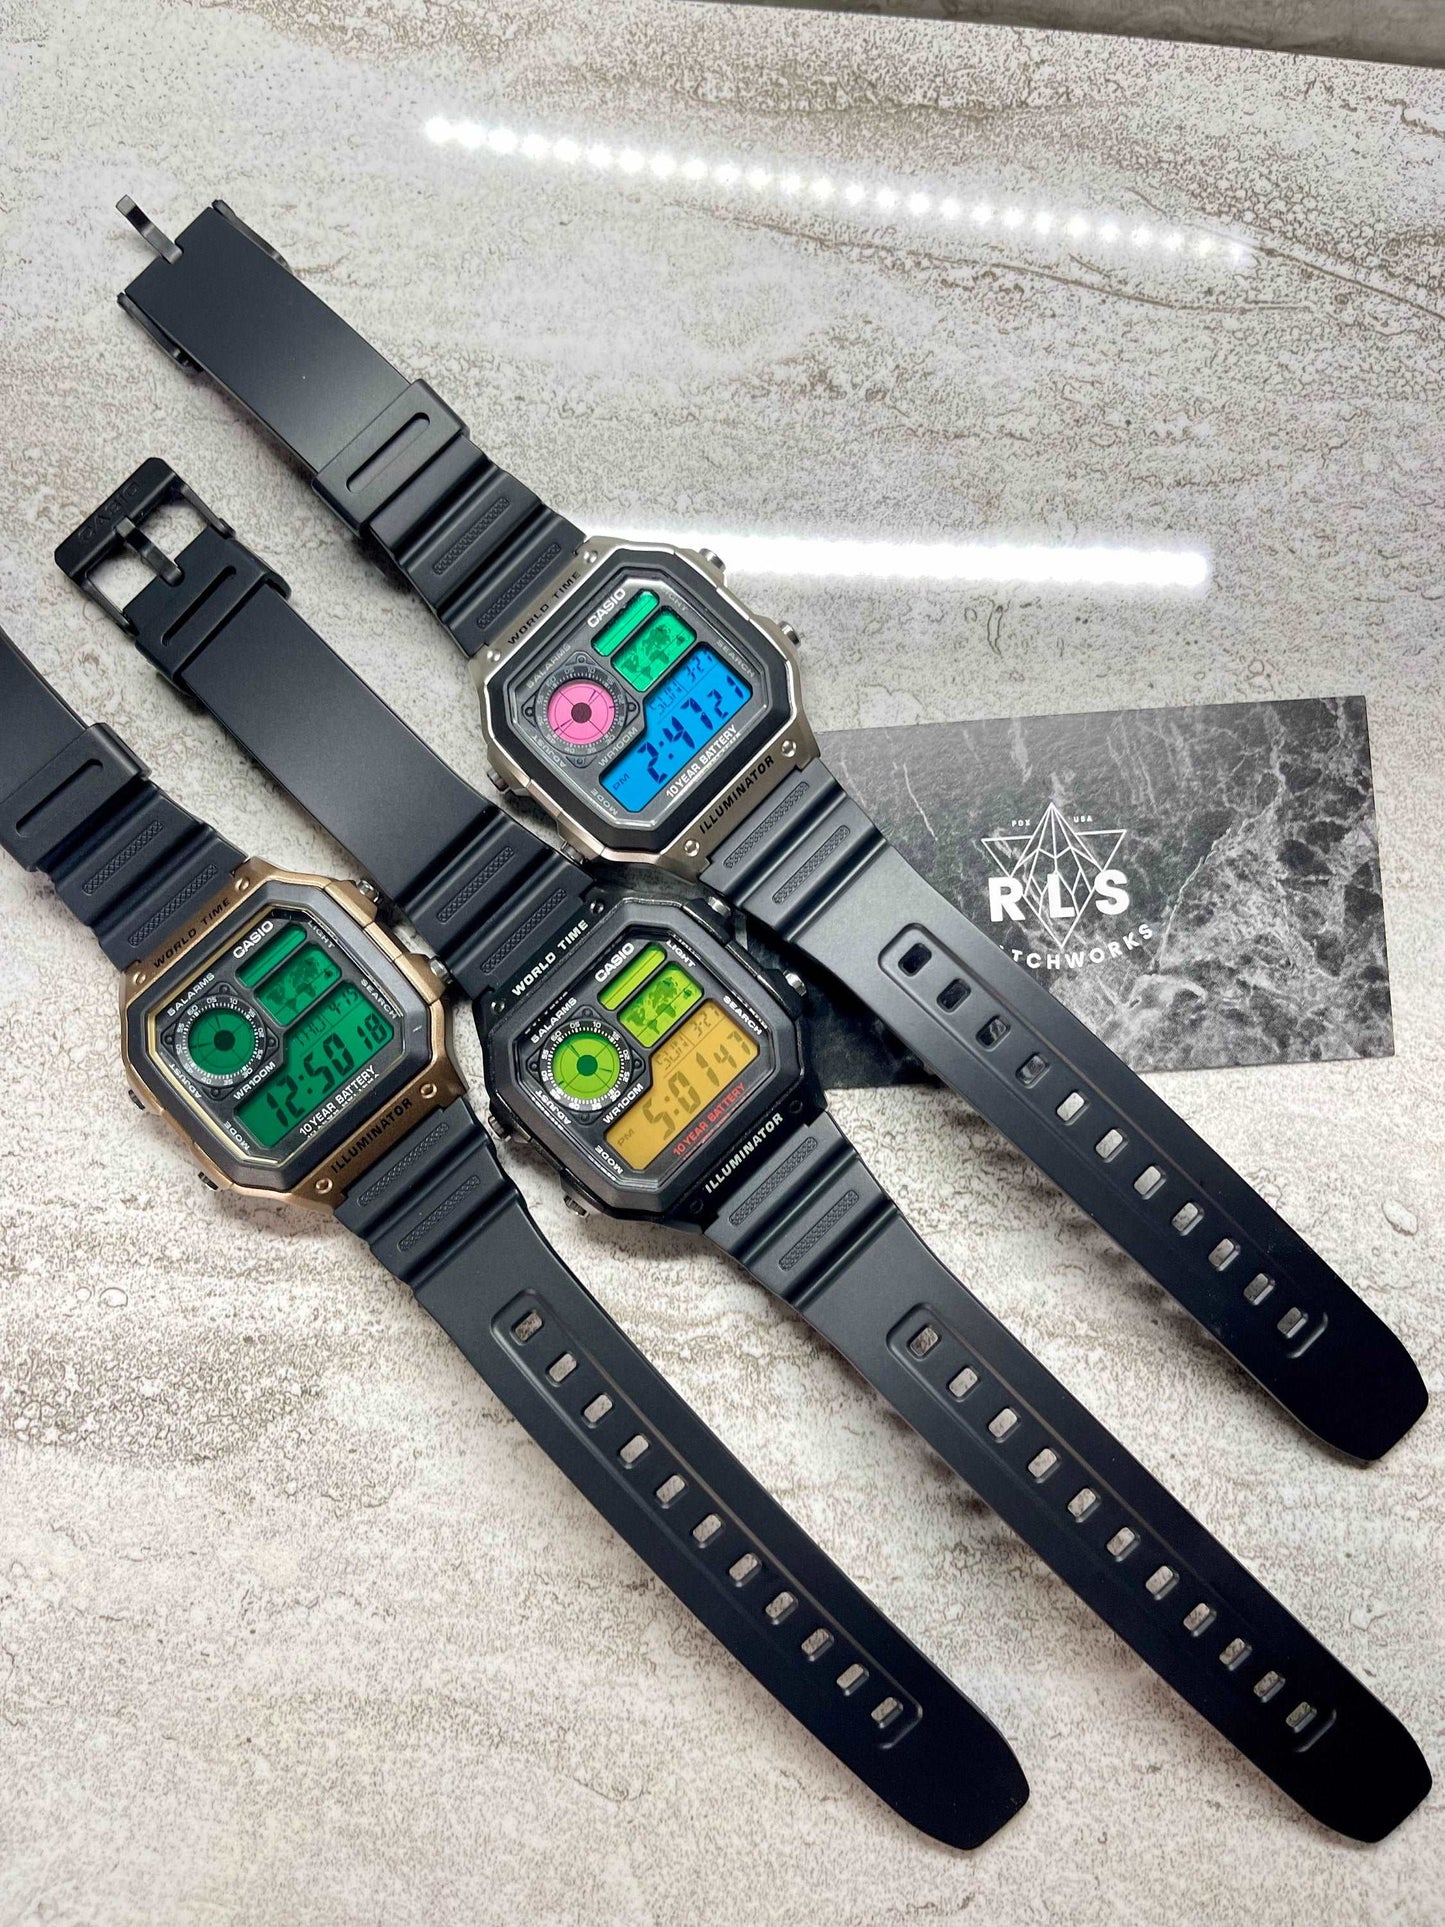 Custom Black Casio World Time Watch with Color Screen Mod (Pick your colors)